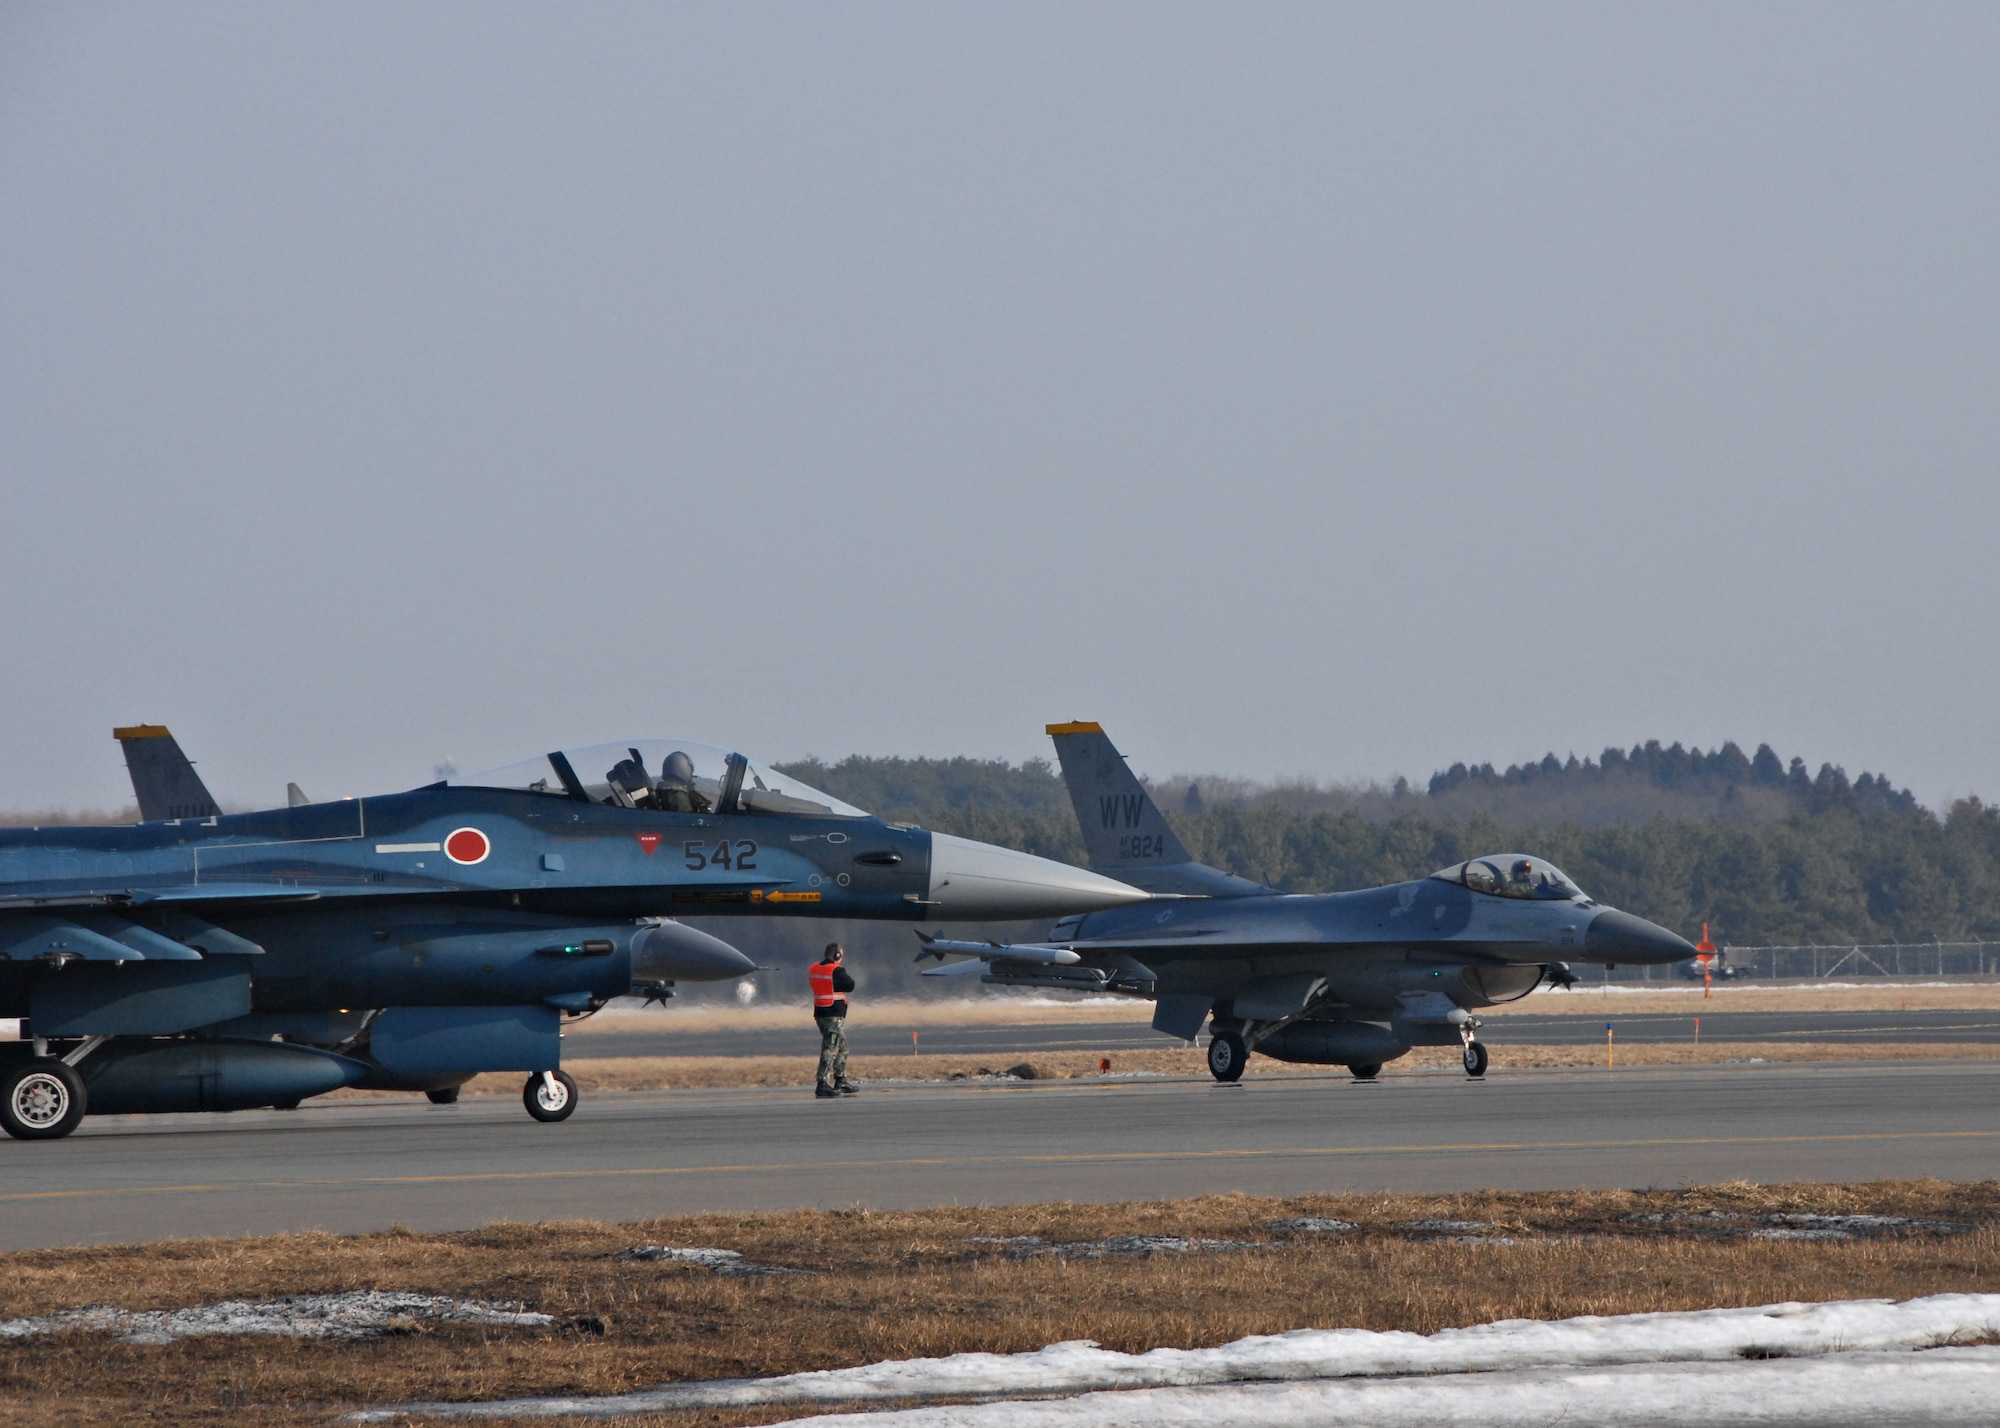 MISAWA AIR BASE, Japan -- A Japan Air Self Defense Force F-2 taxis in front of a U.S. Air Force F-16 on the flightline here March 11, 2008. JASDF and USAF units assigned to Misawa participated in Seikan War, a bilateral air exercise, from March 10-13, 2008. (U.S. Air Force photo by Staff Sgt. Rachel Martinez)